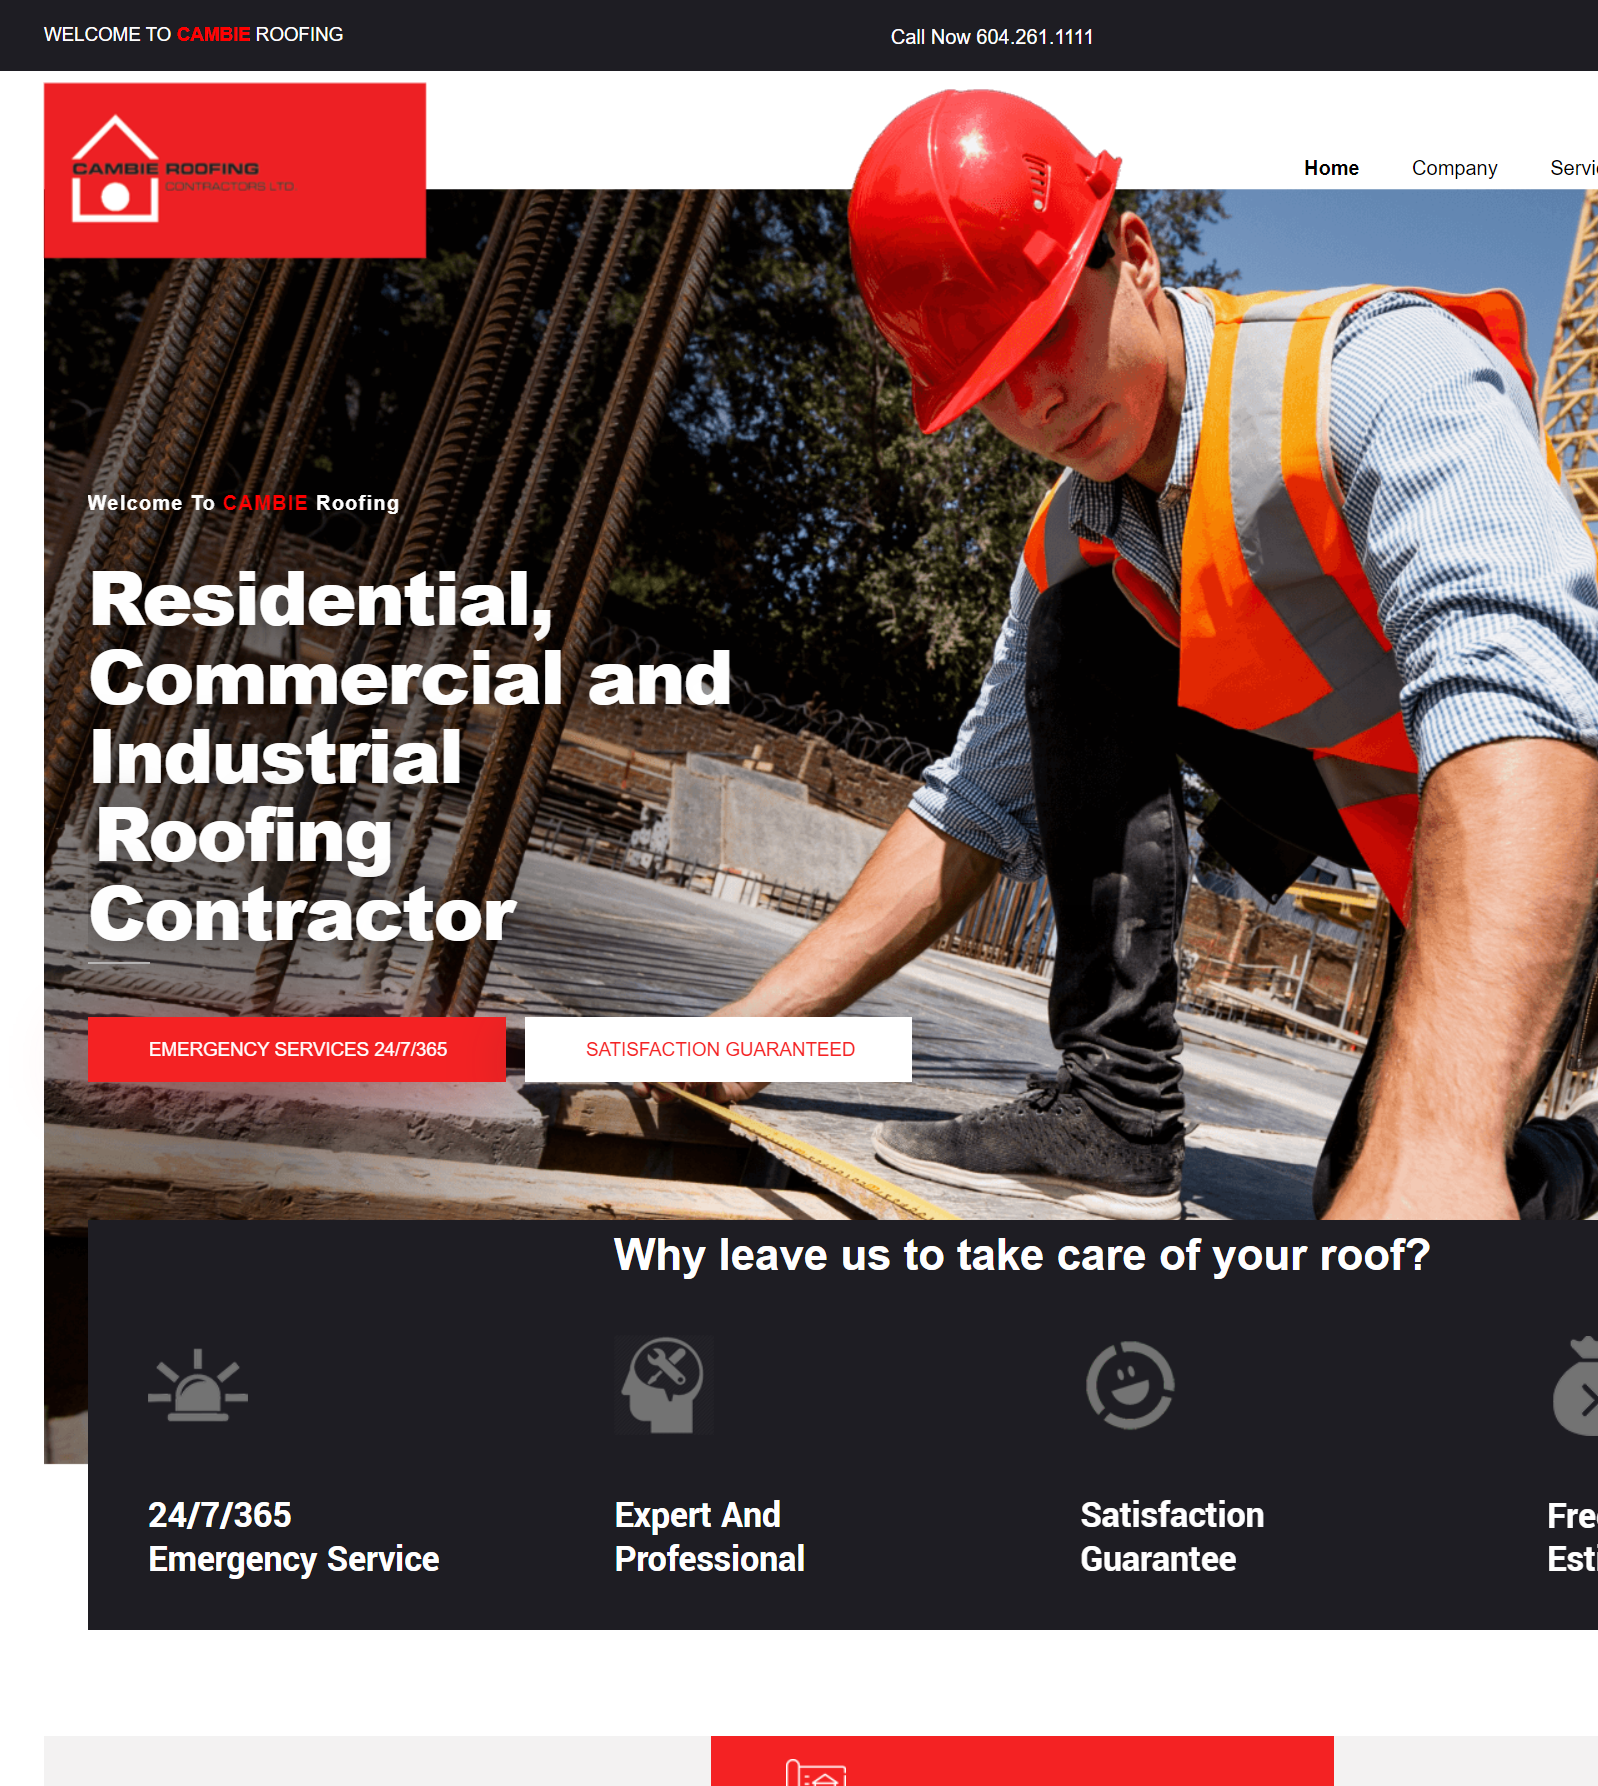 Cambie Roofing